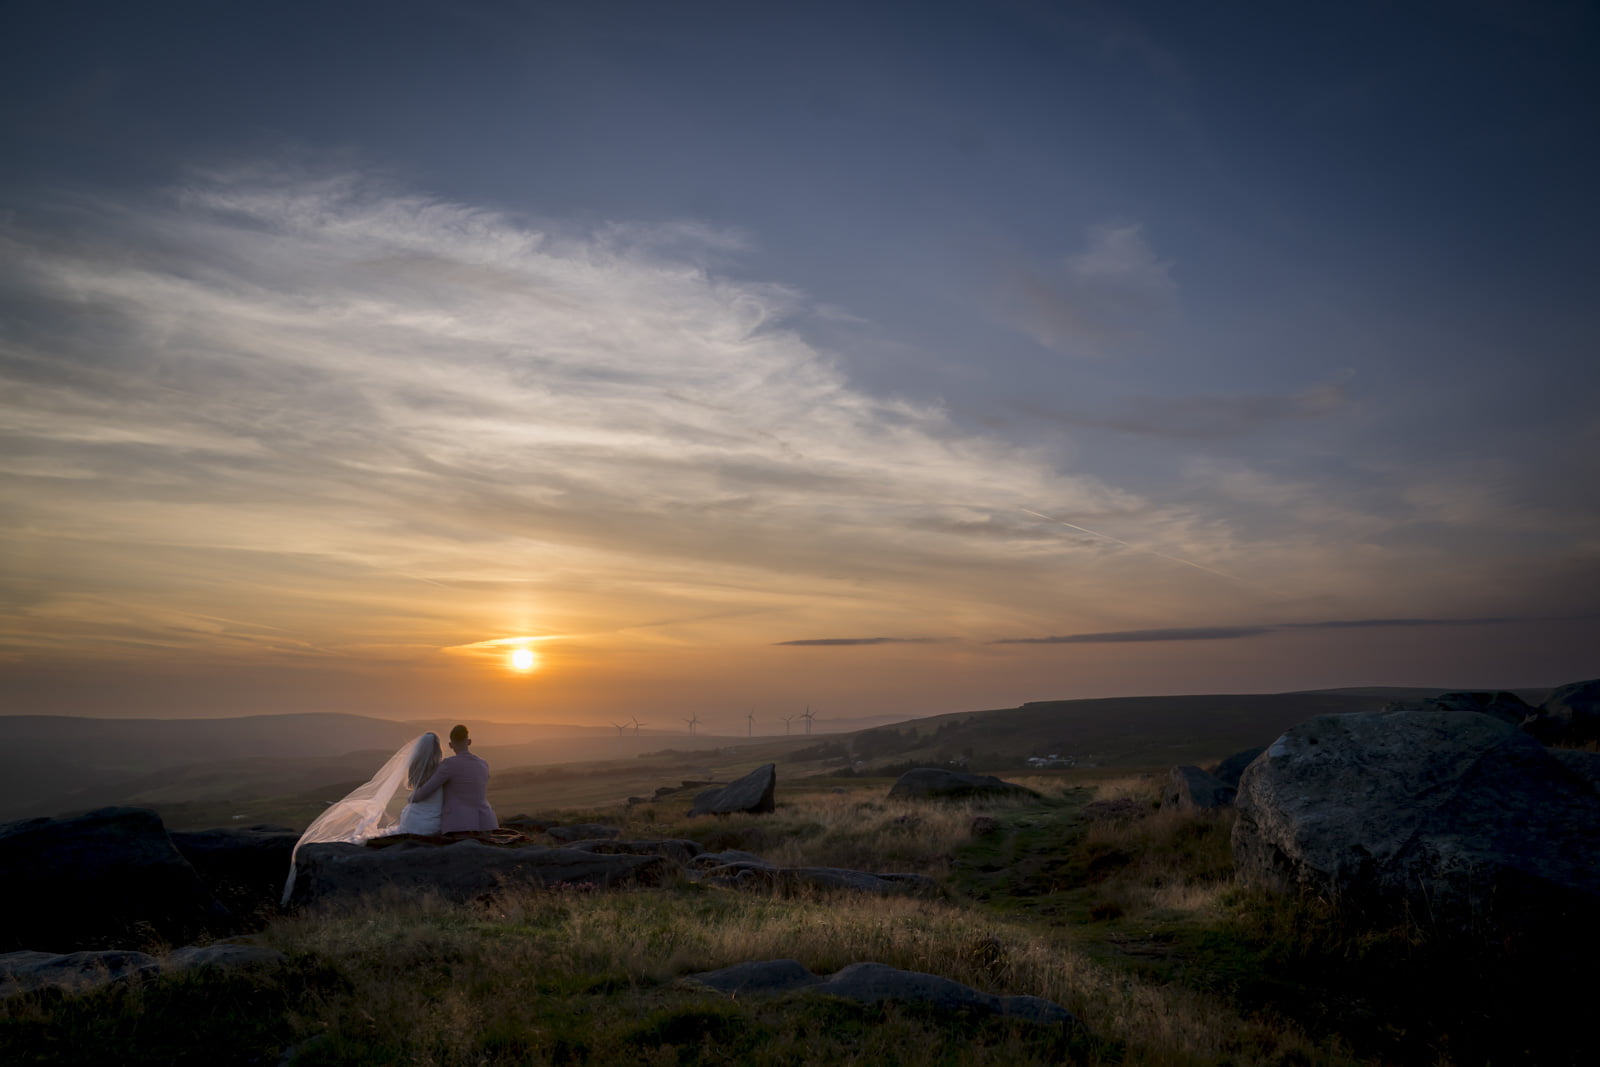 A sunset silhouette of the bride and groom in the natural landscape of Todmorden